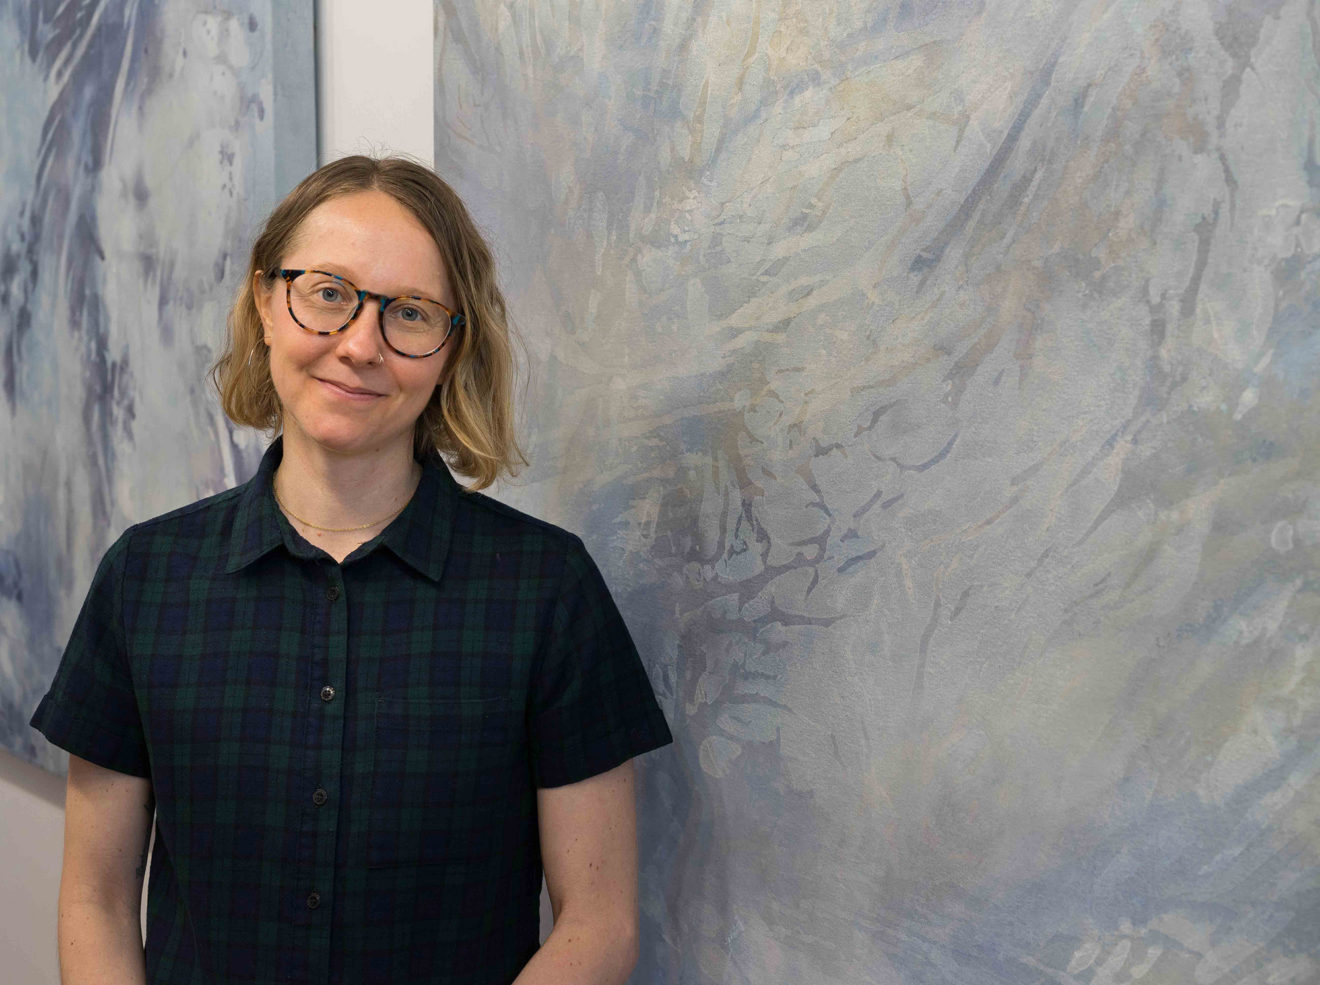 Annie Hejny’s water paintings bring attention to the watershed